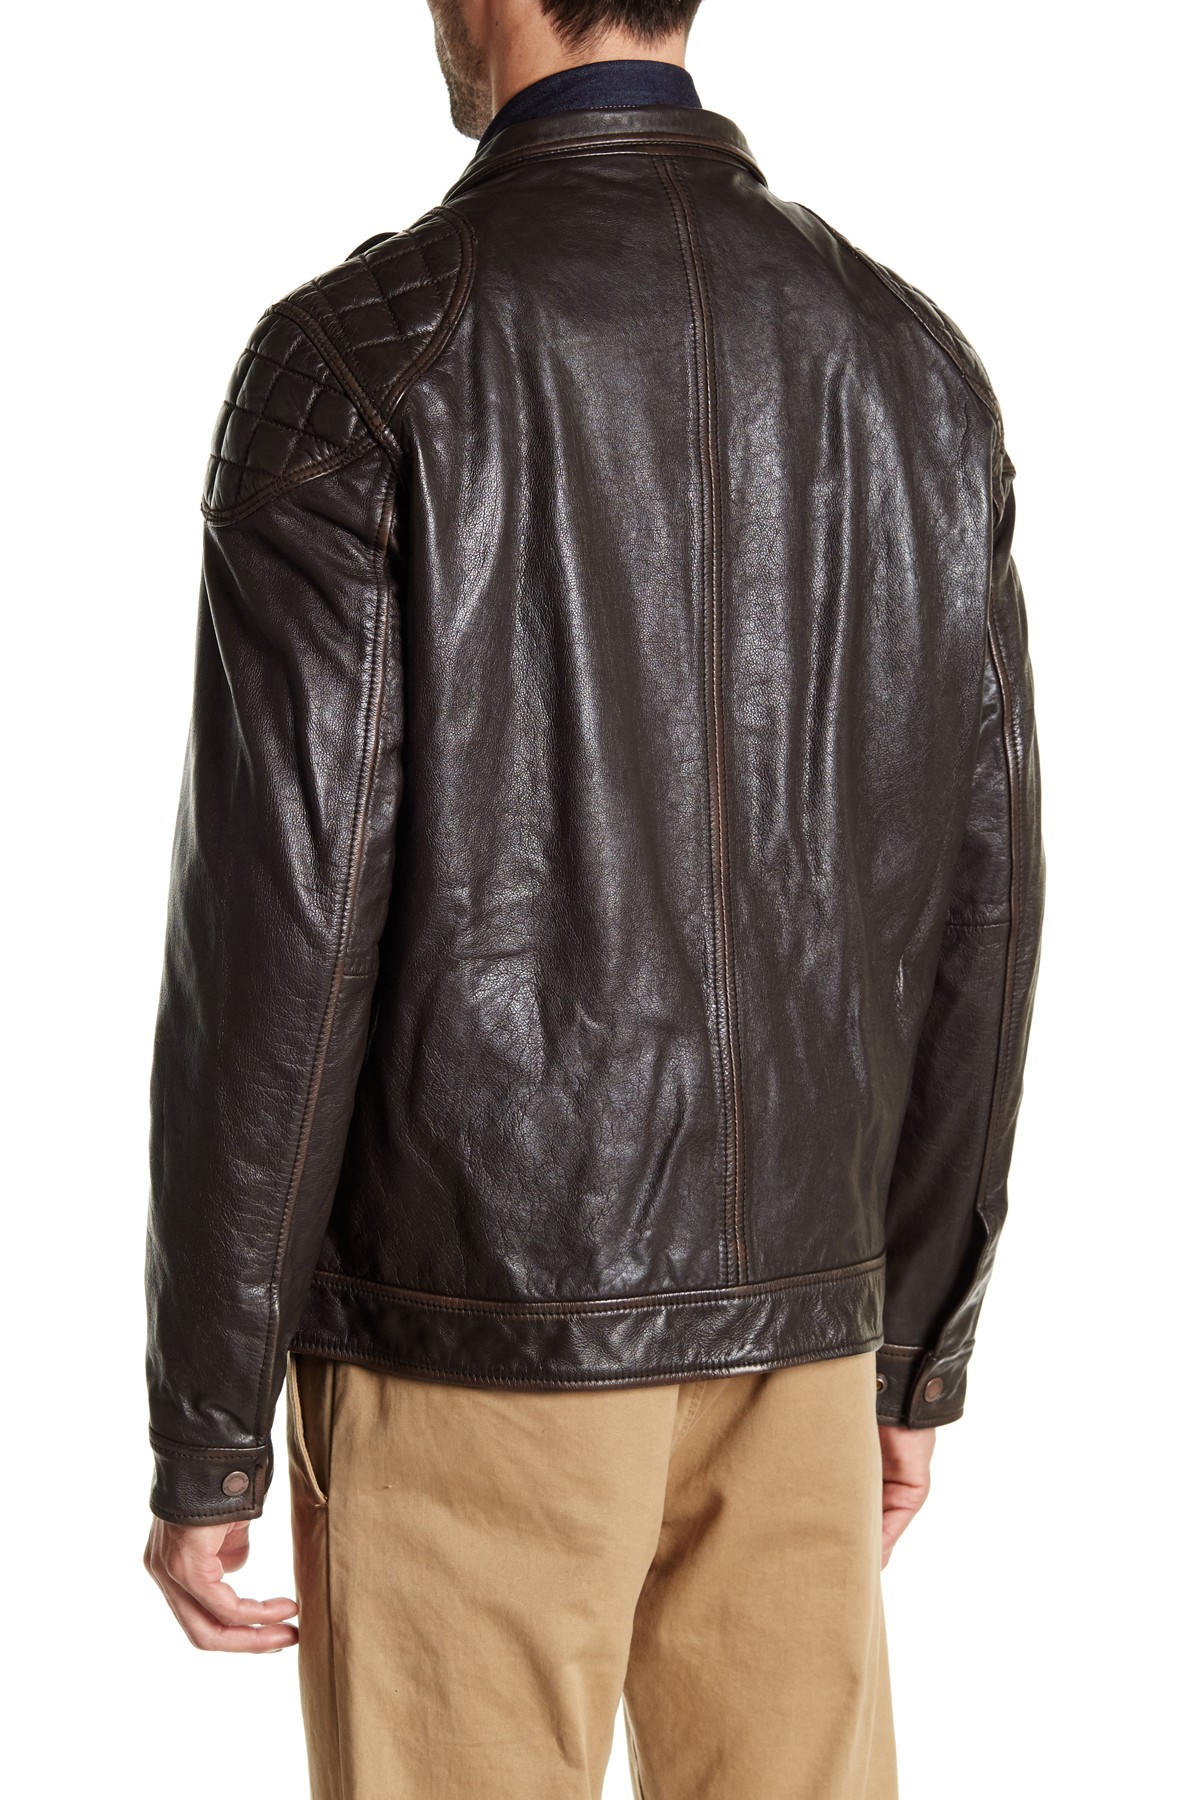 Timberland Skye Peak Quilted Genuine Leather Jacket for Men - Lyst